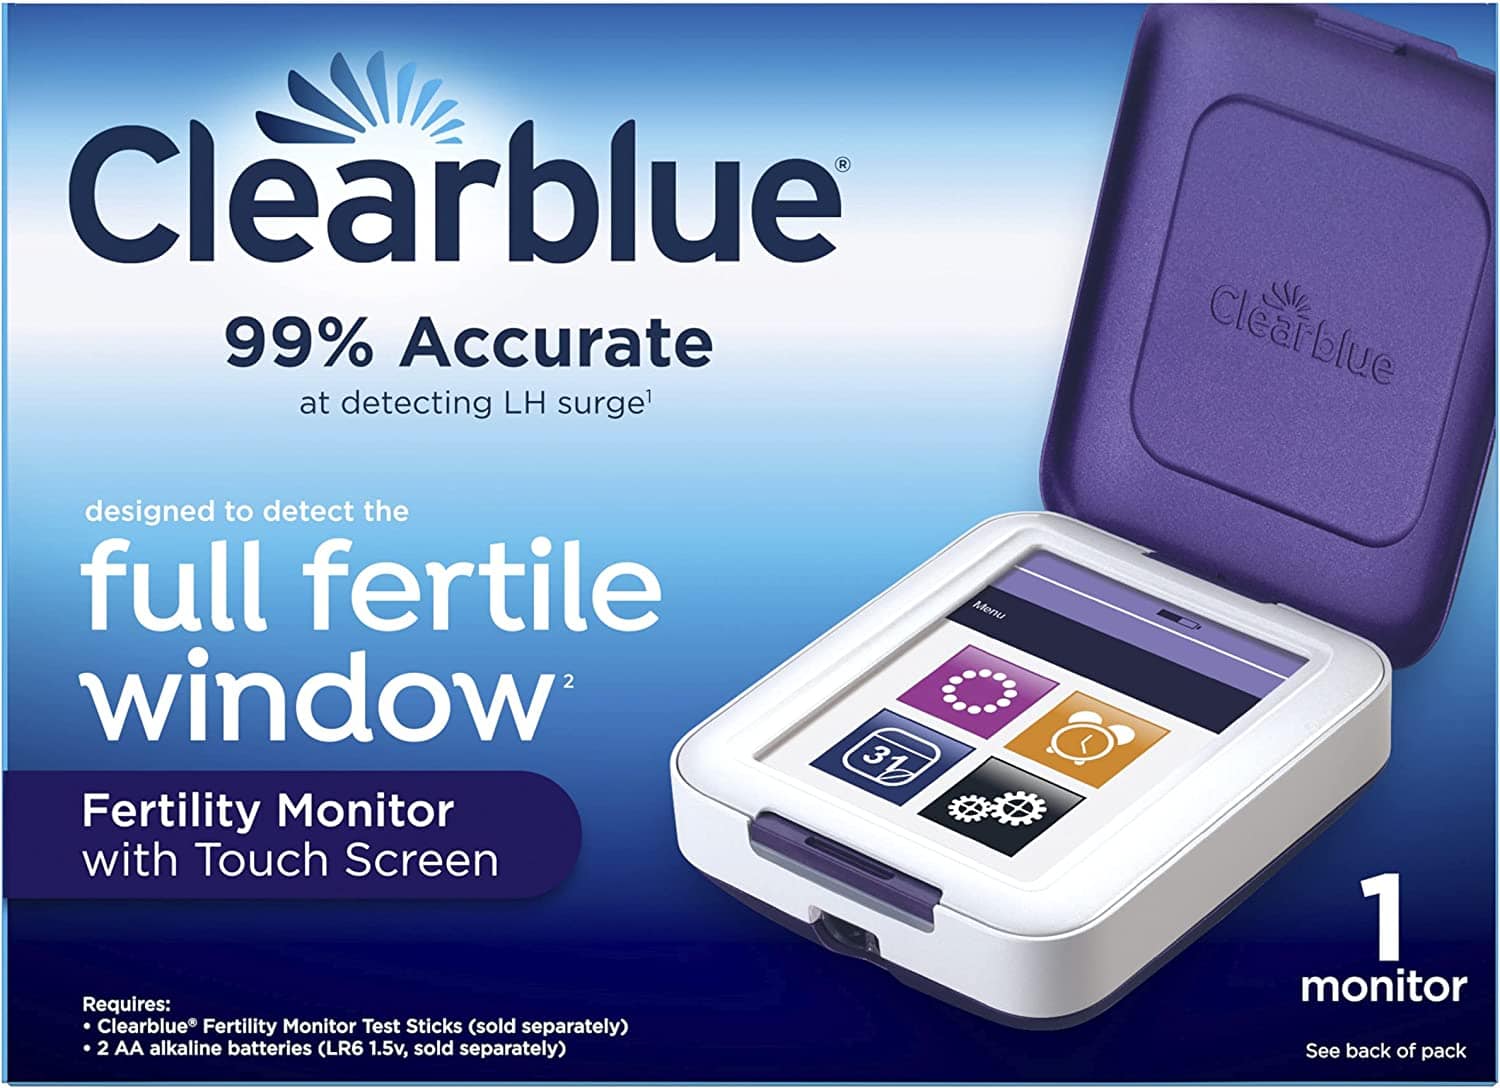 Clearblue fertility test monitor box. 